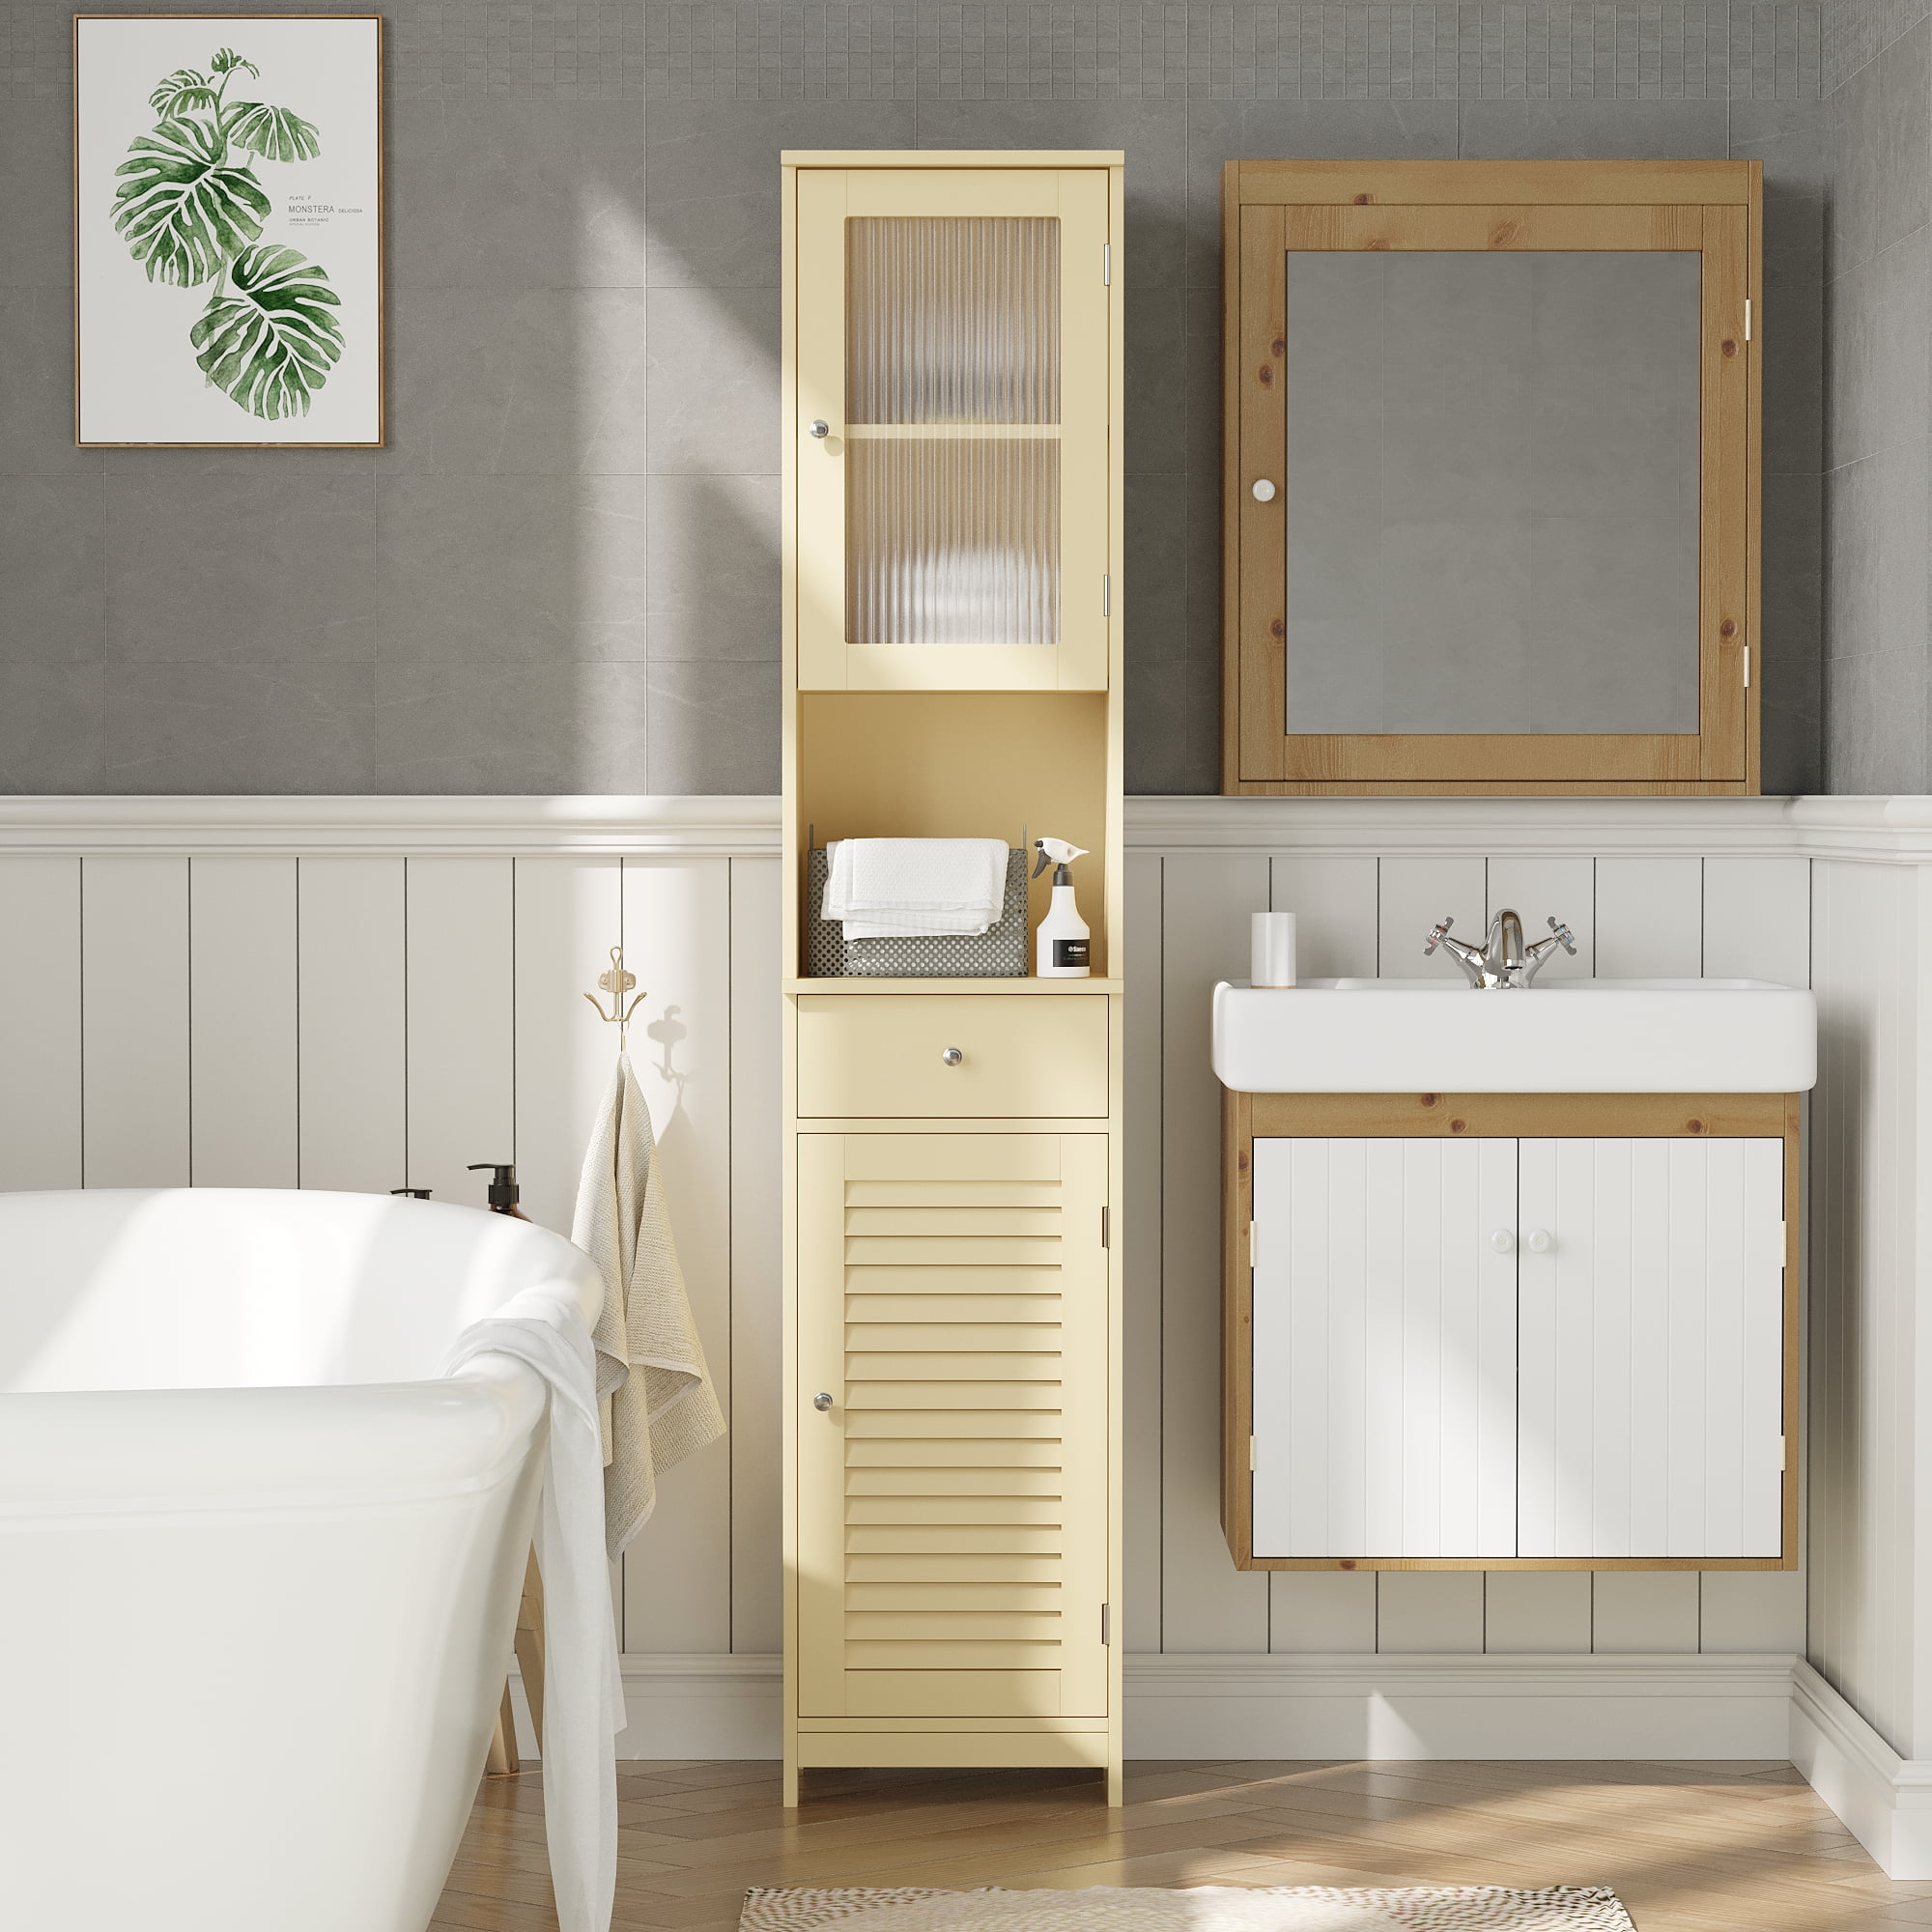 Karl home 71 Tall Bathroom Storage Cabinet Thin Floor Cabinet with 2  Doors, 1 Drawer & 1 Open Shelf, Freestanding Tower Cabinet for Bathroom,  Living